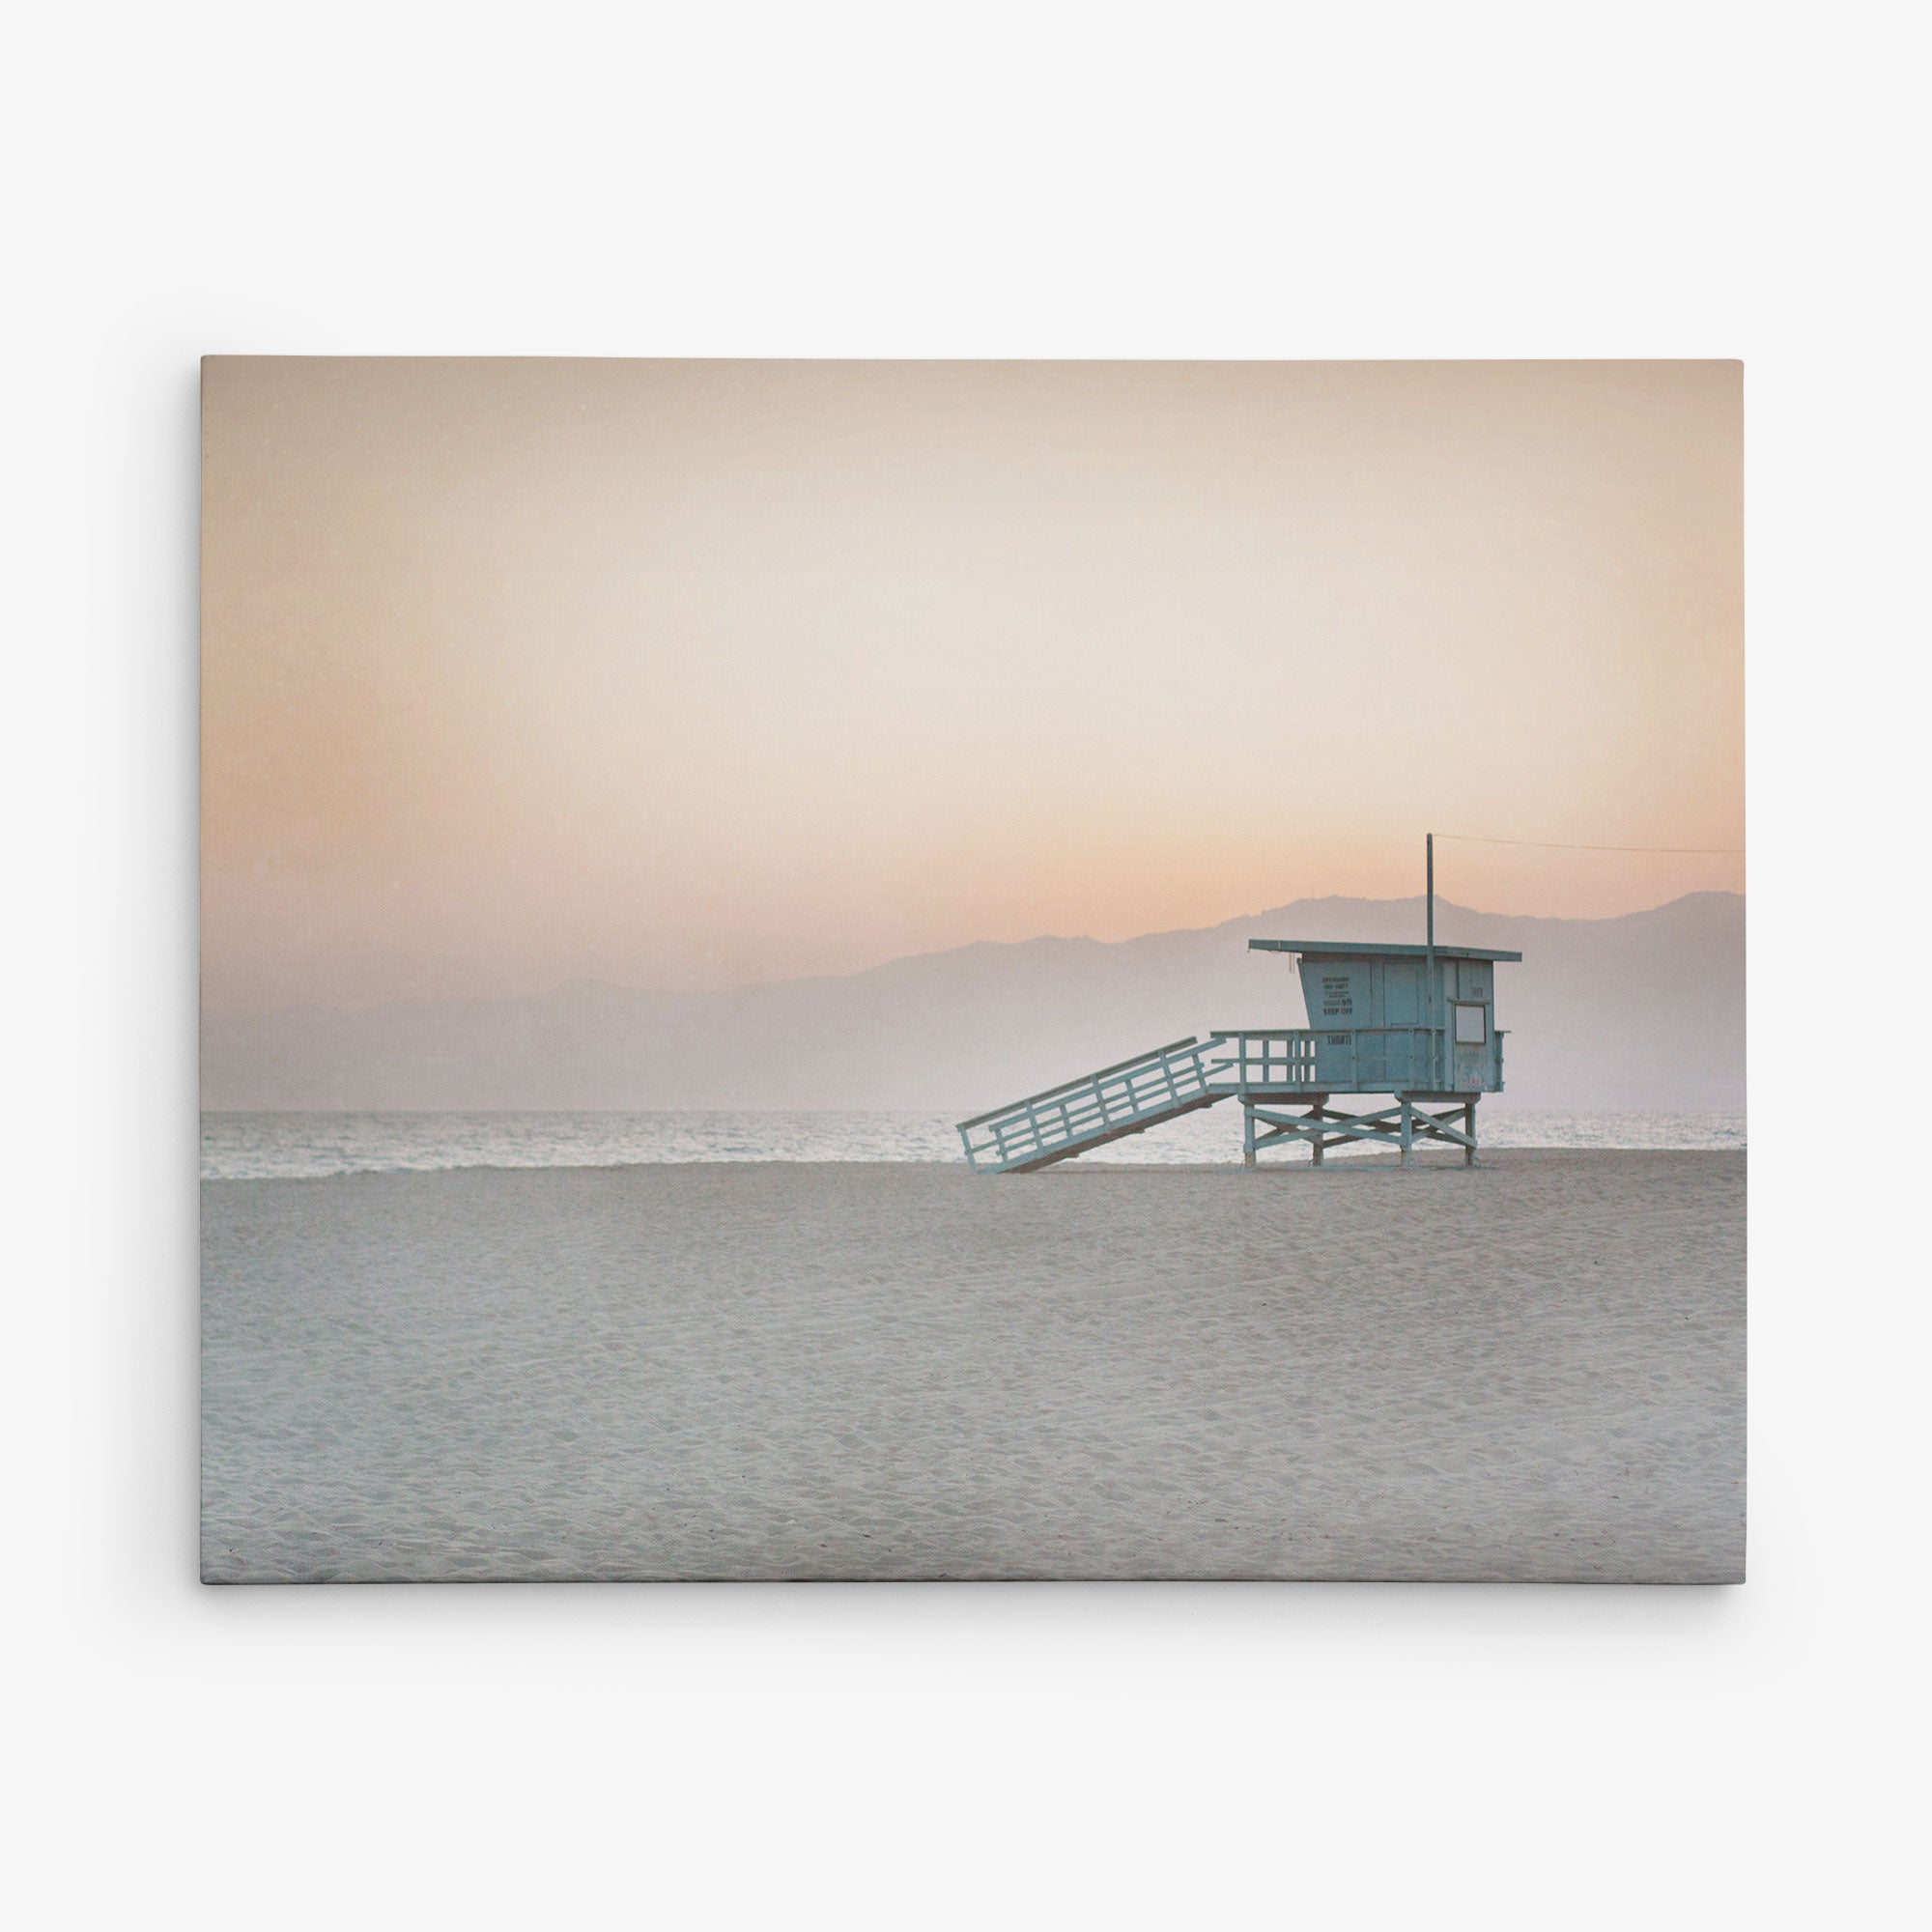 A serene beach scene at sunset featuring a solitary Offley Green lifeguard tower against a soft pink sky with marine layer mist and mountain silhouettes in the background.